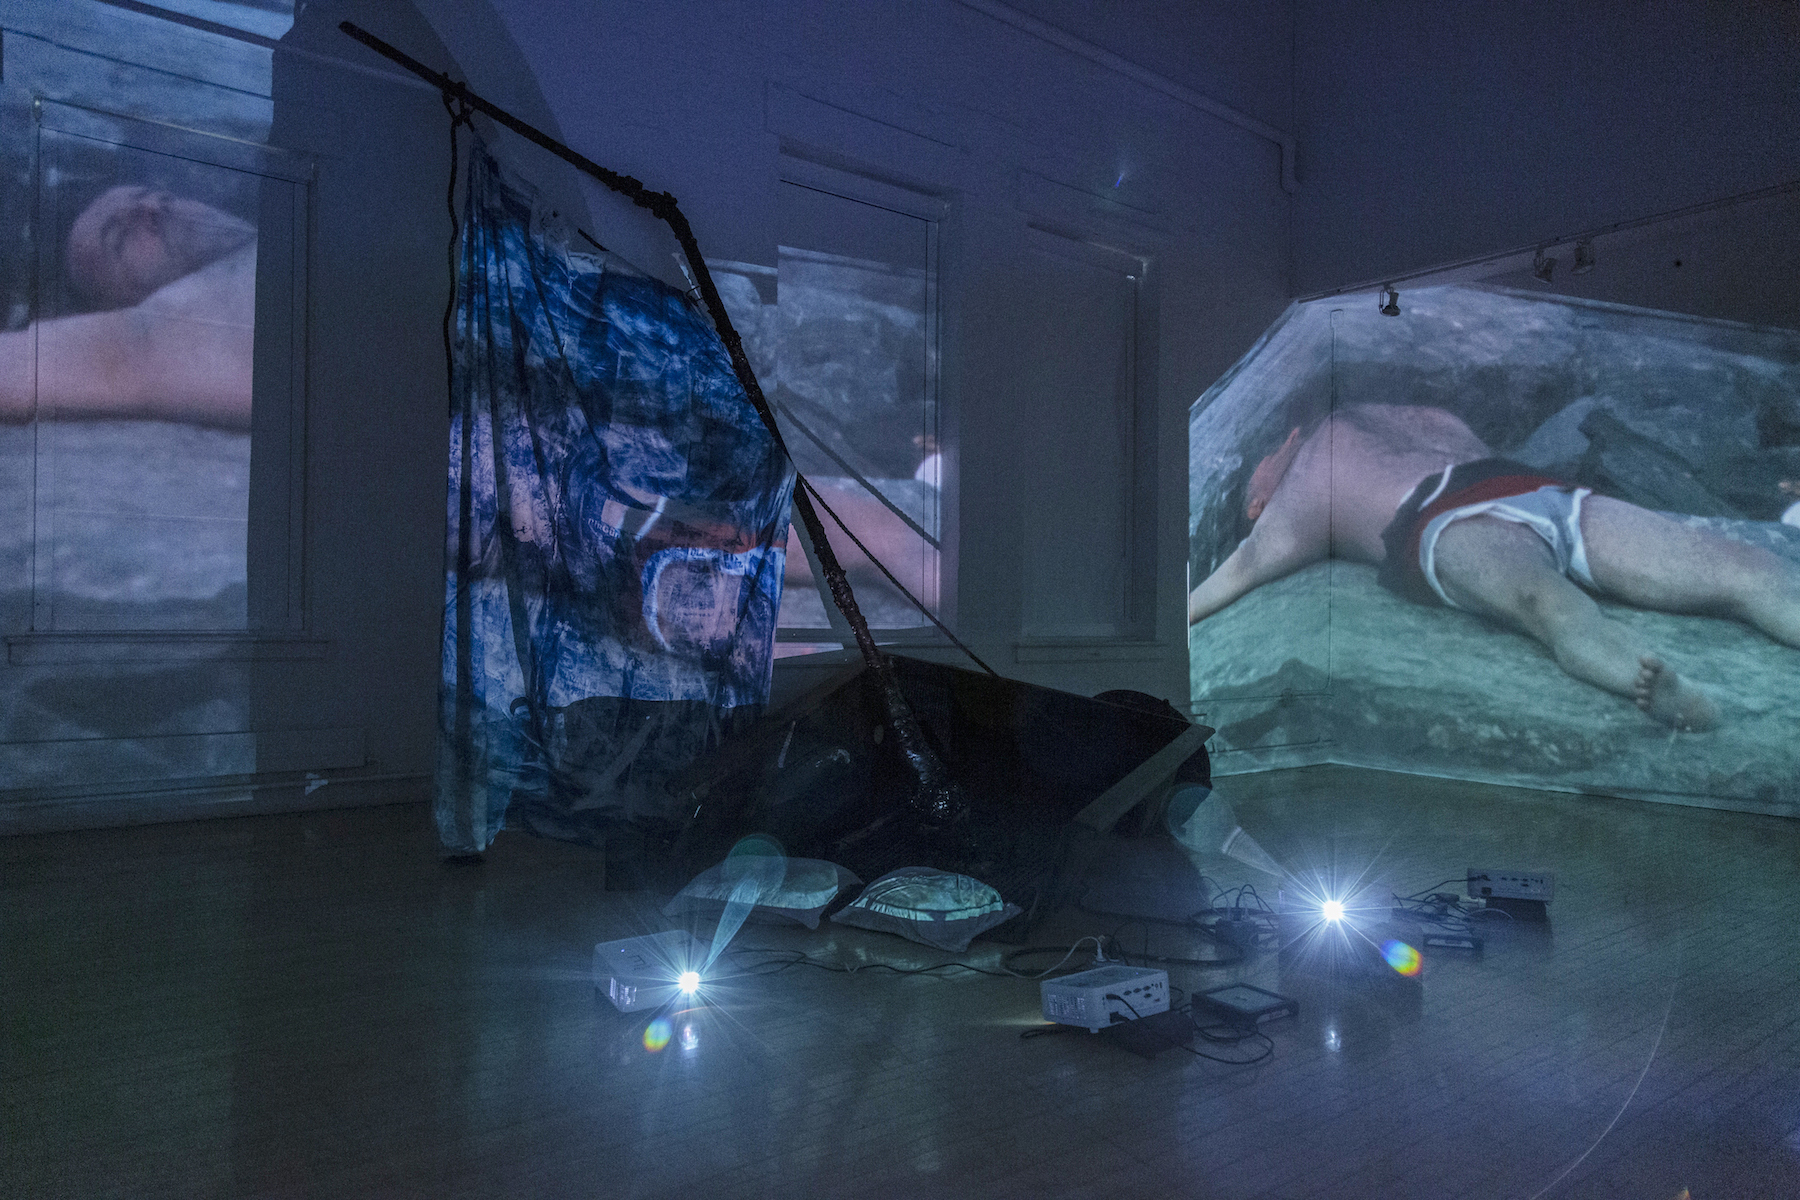 Installation view, 2019, Sirens, 4- channel projection, Ithaca, NY.